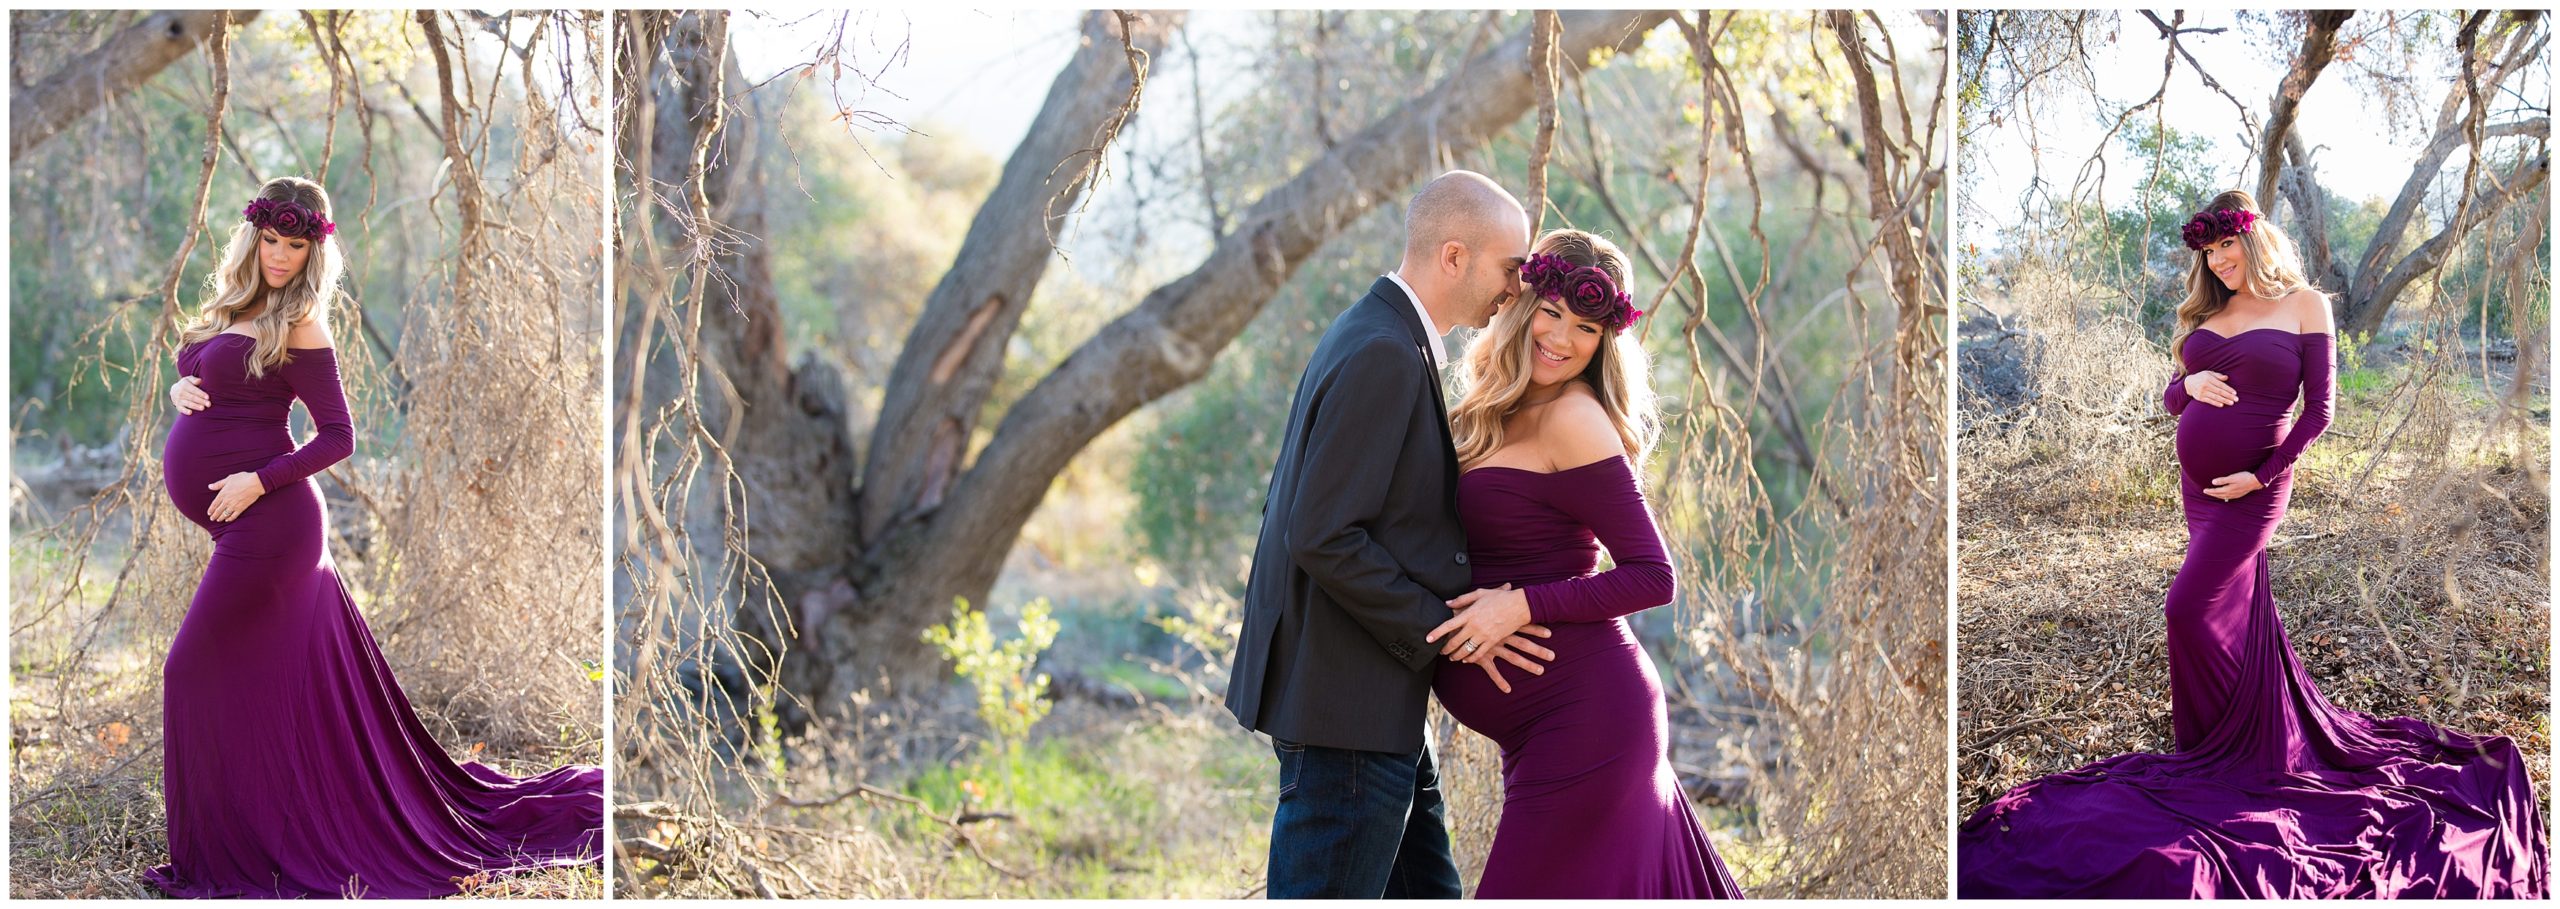 sew trendy maternity gown, plum maternity dress, Corona maternity photography, maternity photographer corona ca, maternity photographer Riverside ca, Southern California premiere maternity photographer, baby bump photography, family photography corona ca, spring maternity photography, outdoor maternity photography, maternity session